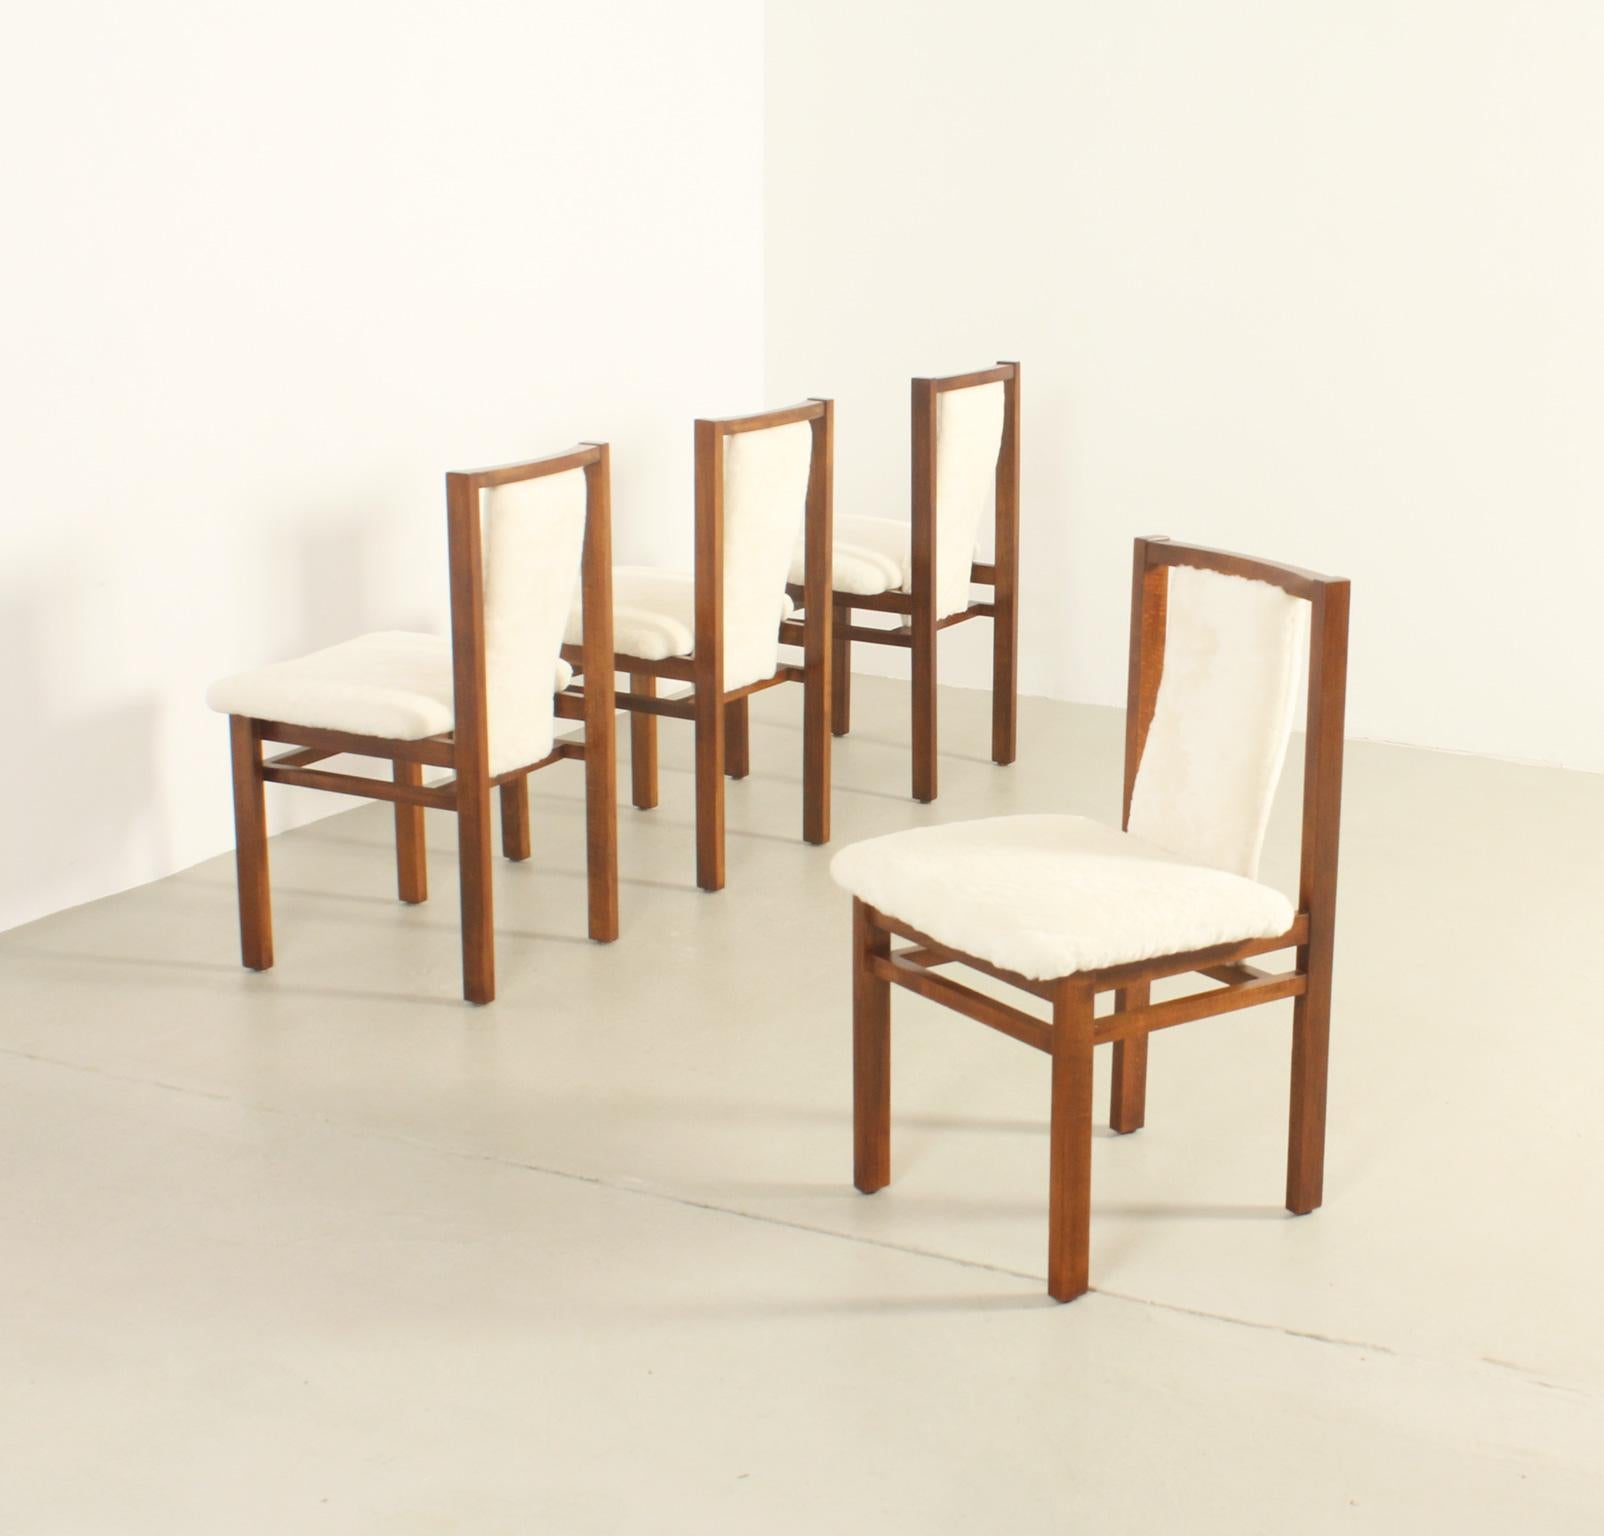 Mid-Century Modern Four Dining Chairs by Jordi Vilanova in Oak Wood and Sheepskin, Spain, 1960's For Sale